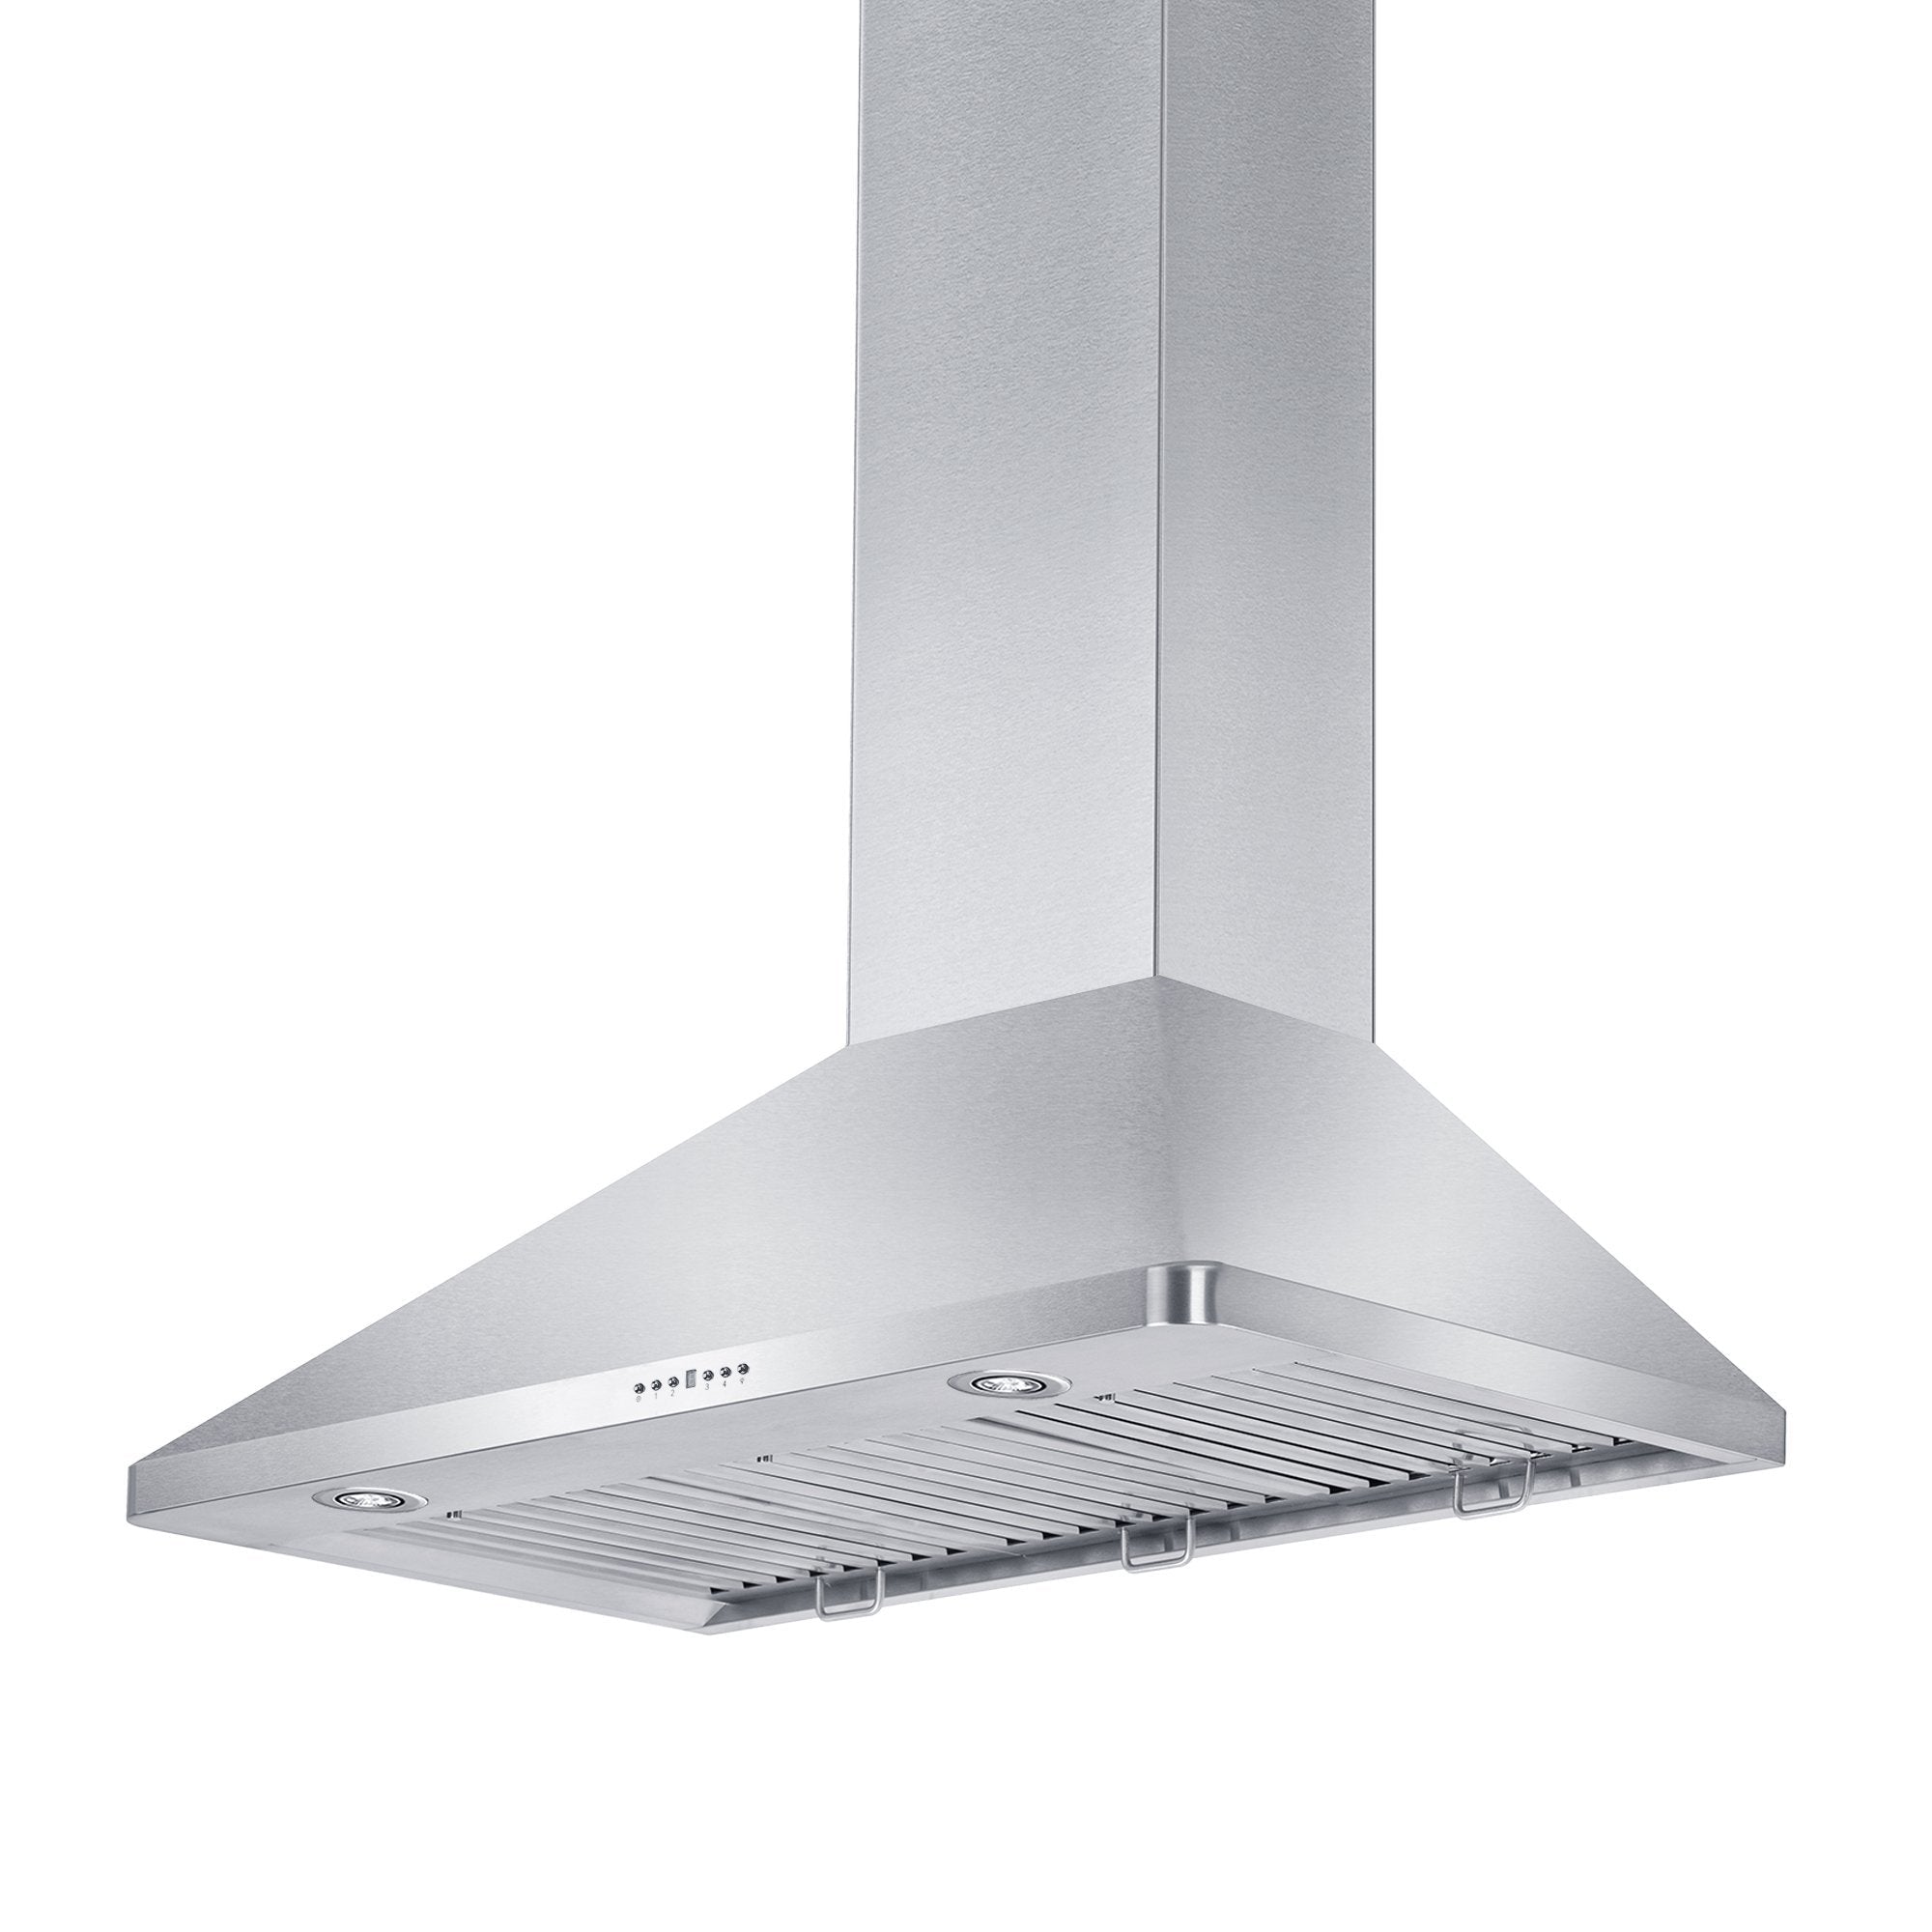 ZLINE Convertible Vent Wall Mount Range Hood in Stainless Steel (KF1) side under showing lighting and baffle filters.